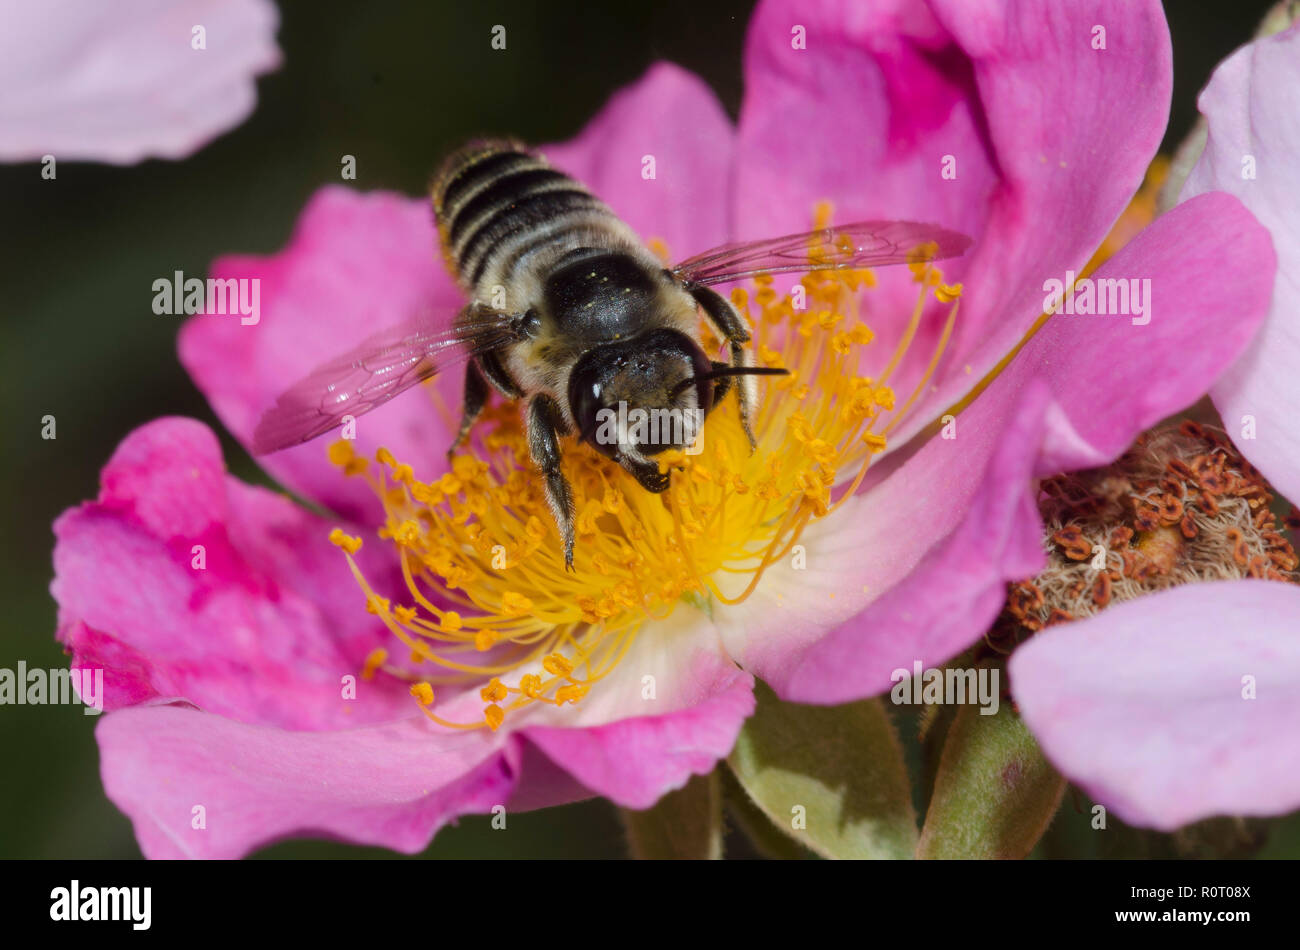 Leaf-cutter Bee, Megachile sp., on wild rose, Rosa sp. Stock Photo